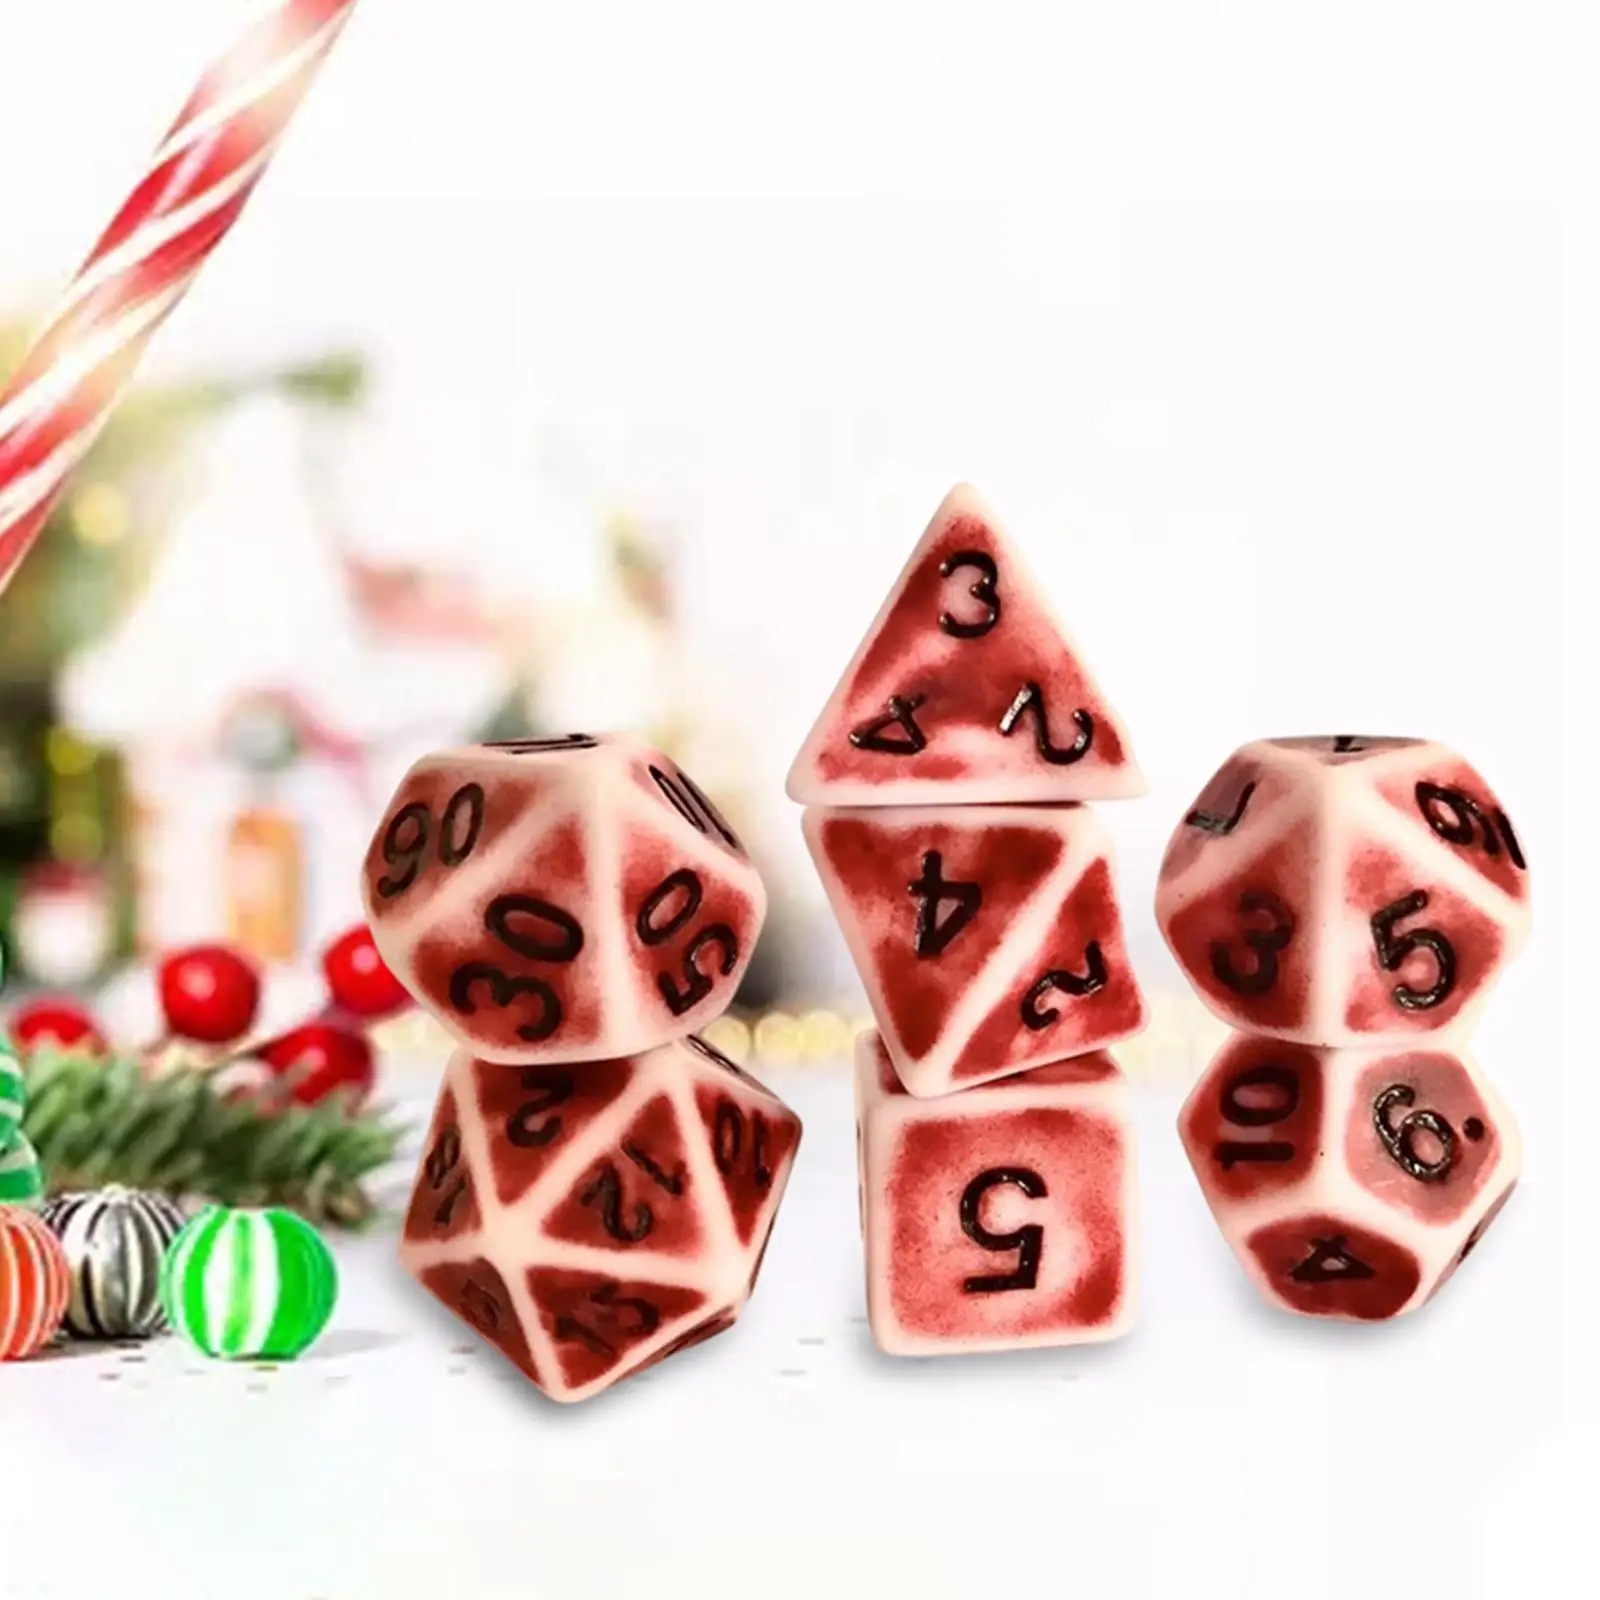 Set of 7 Polyhedral Dice  D8 D10 D10 D12 D20 for Role Playing Games